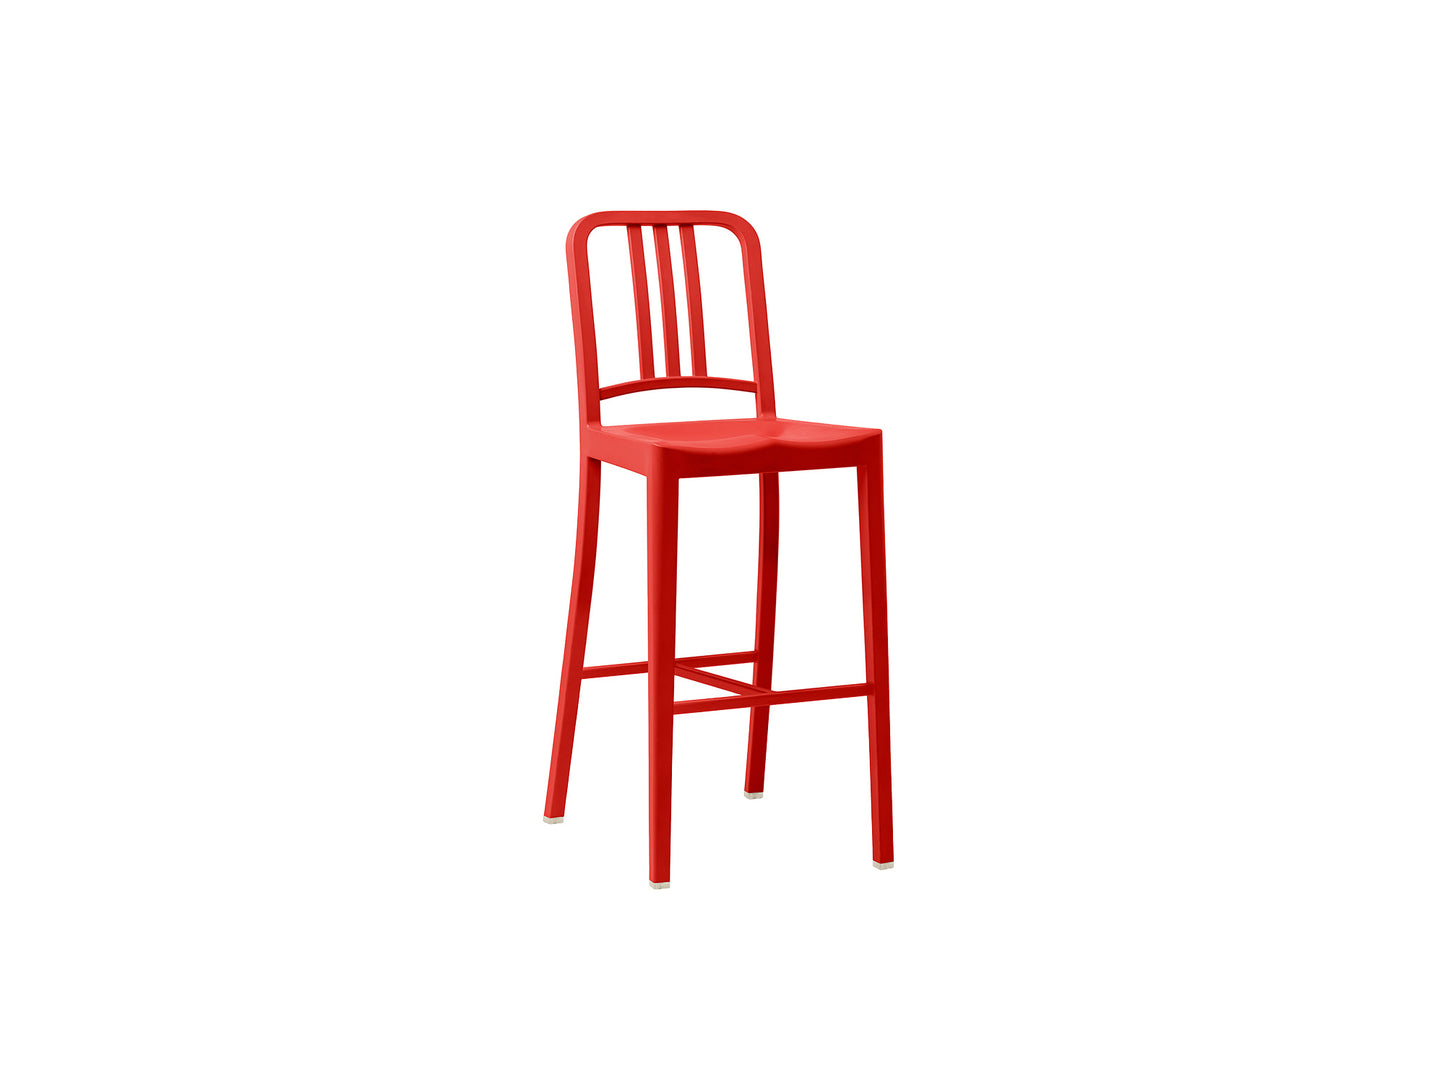 111 Navy Bar Stool by Emeco -  Red